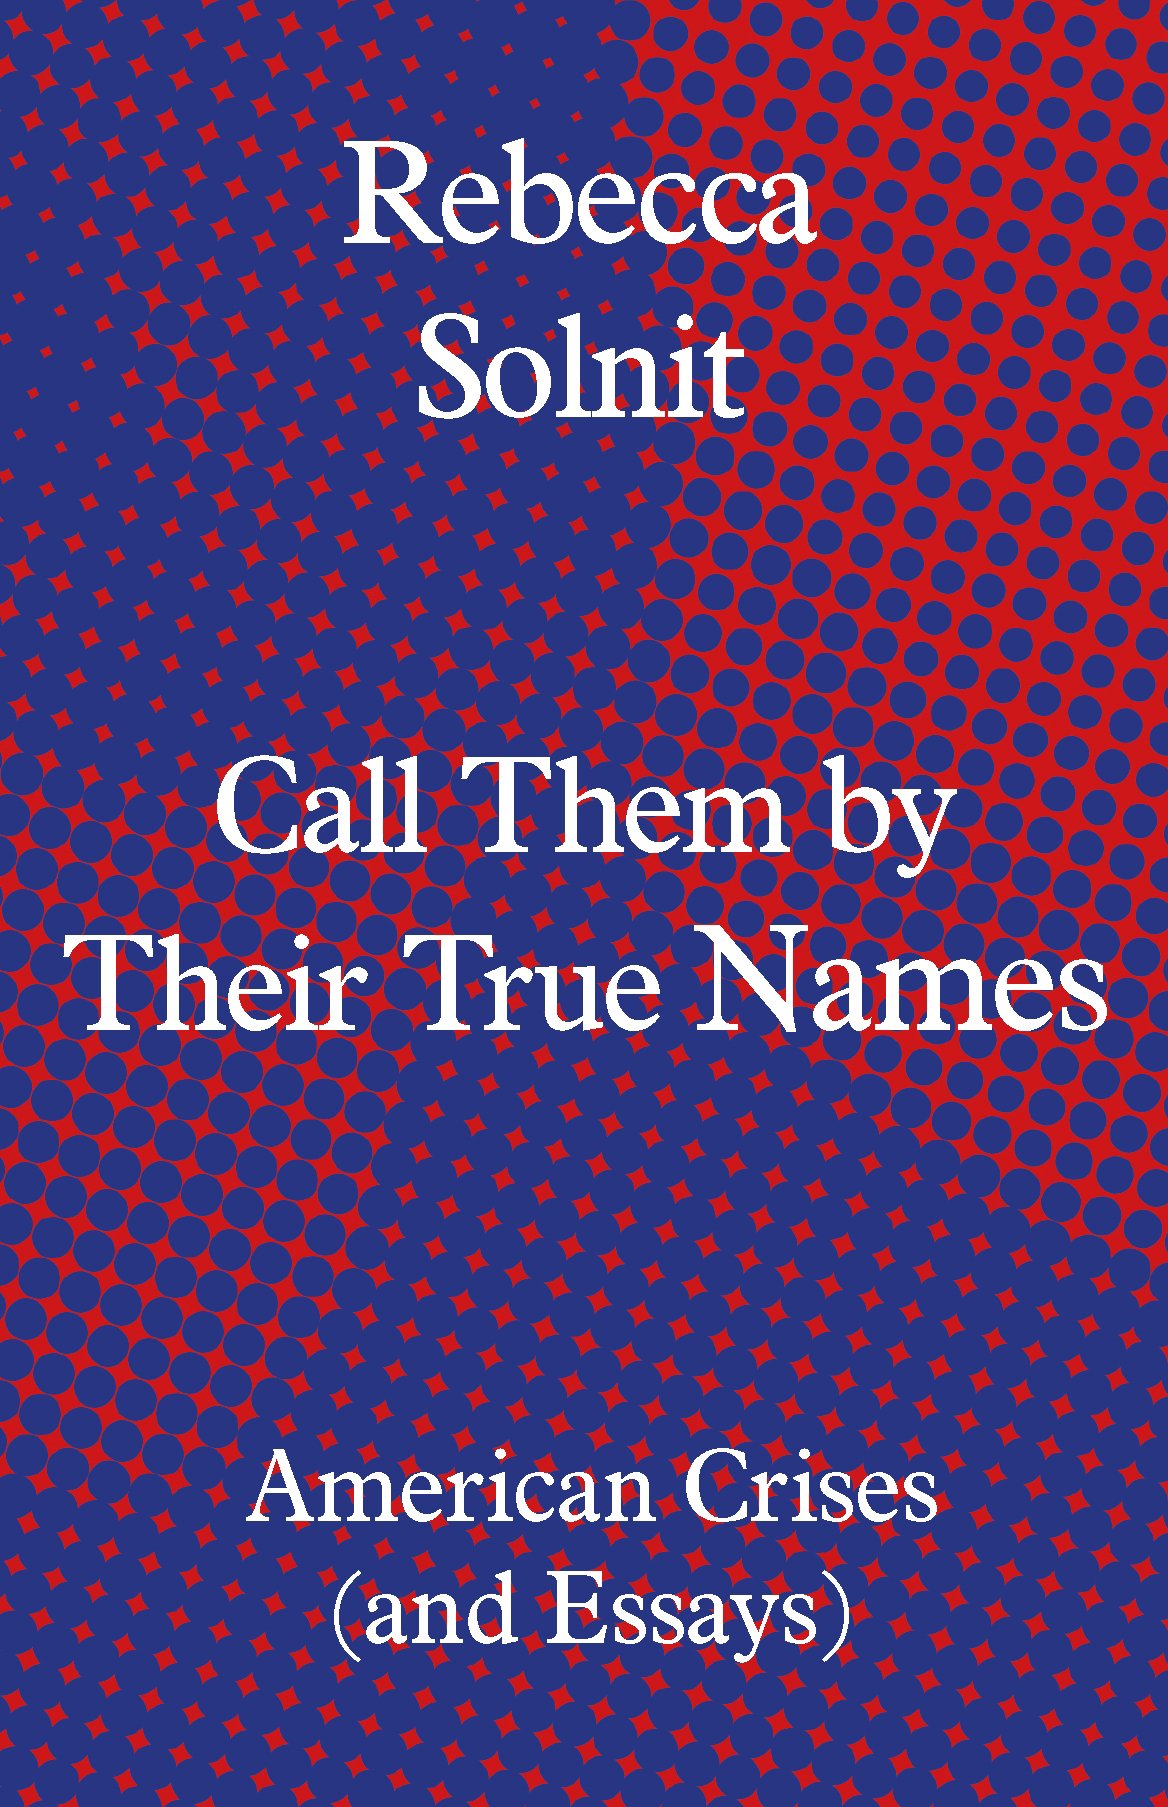 Call Them by Their True Names | Rebecca Solnit